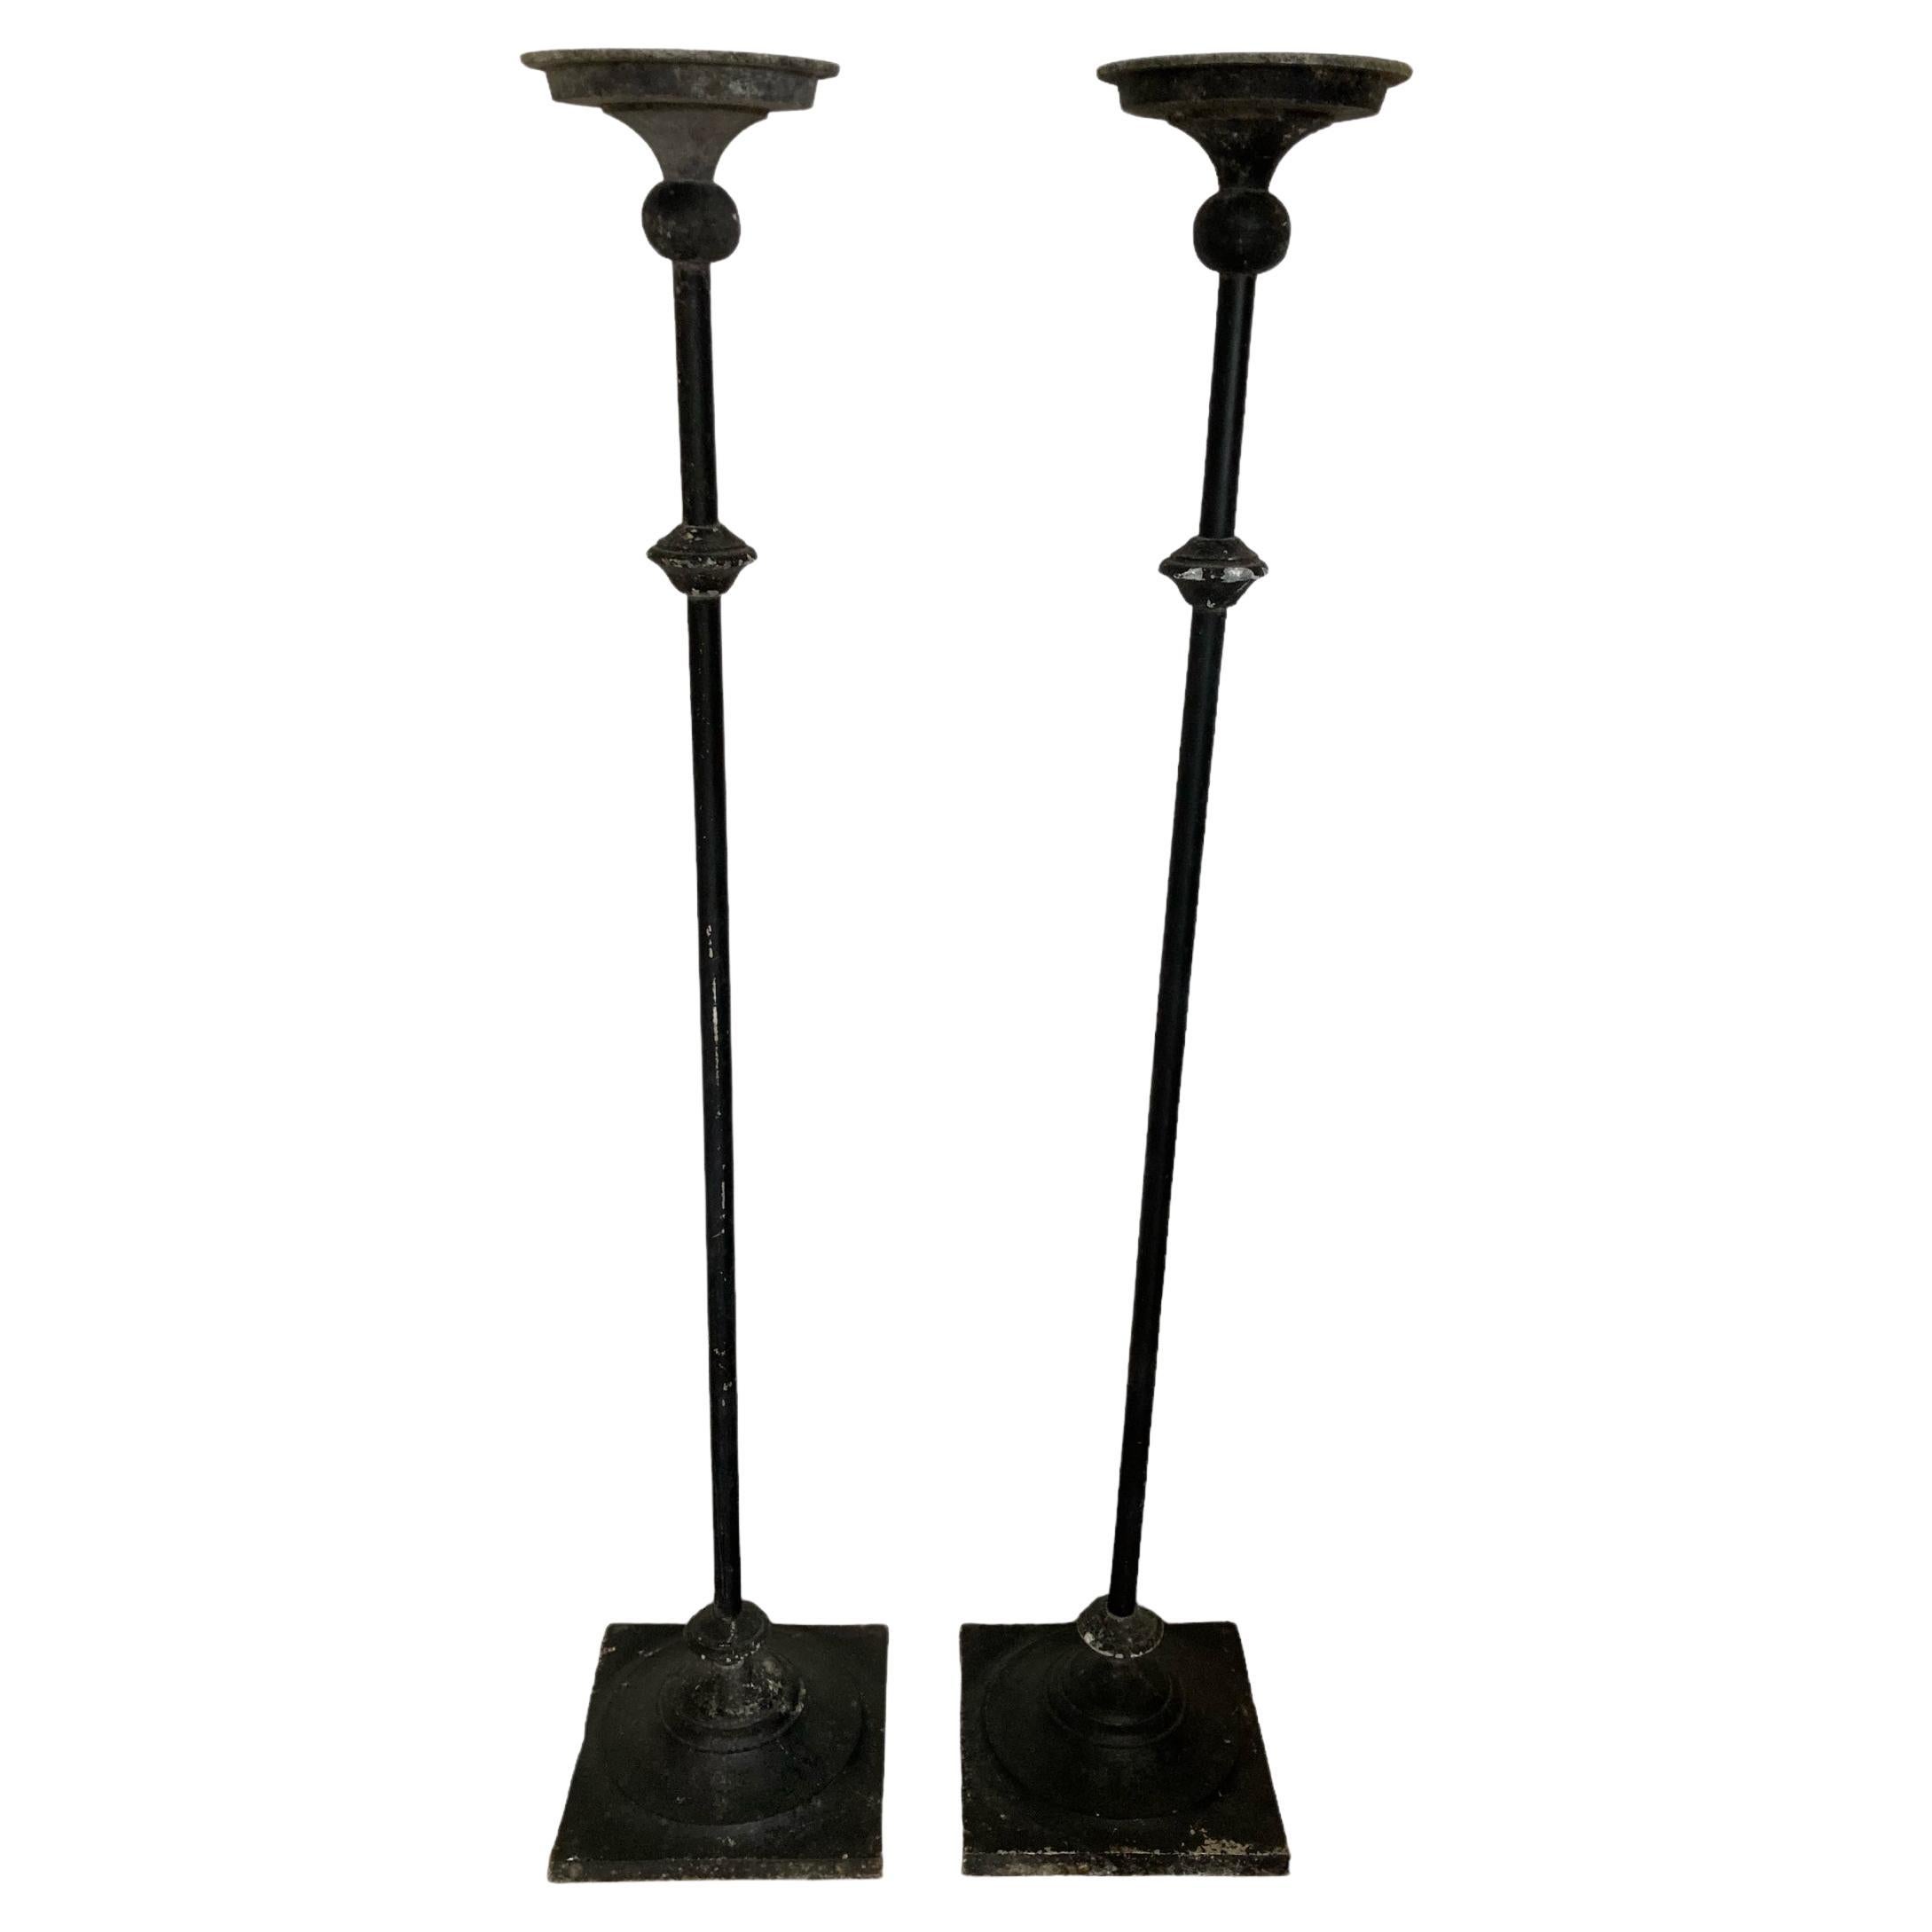 A Pair of Tall Wrought Iron Church Floor Candle Holders Gothic Style For Sale